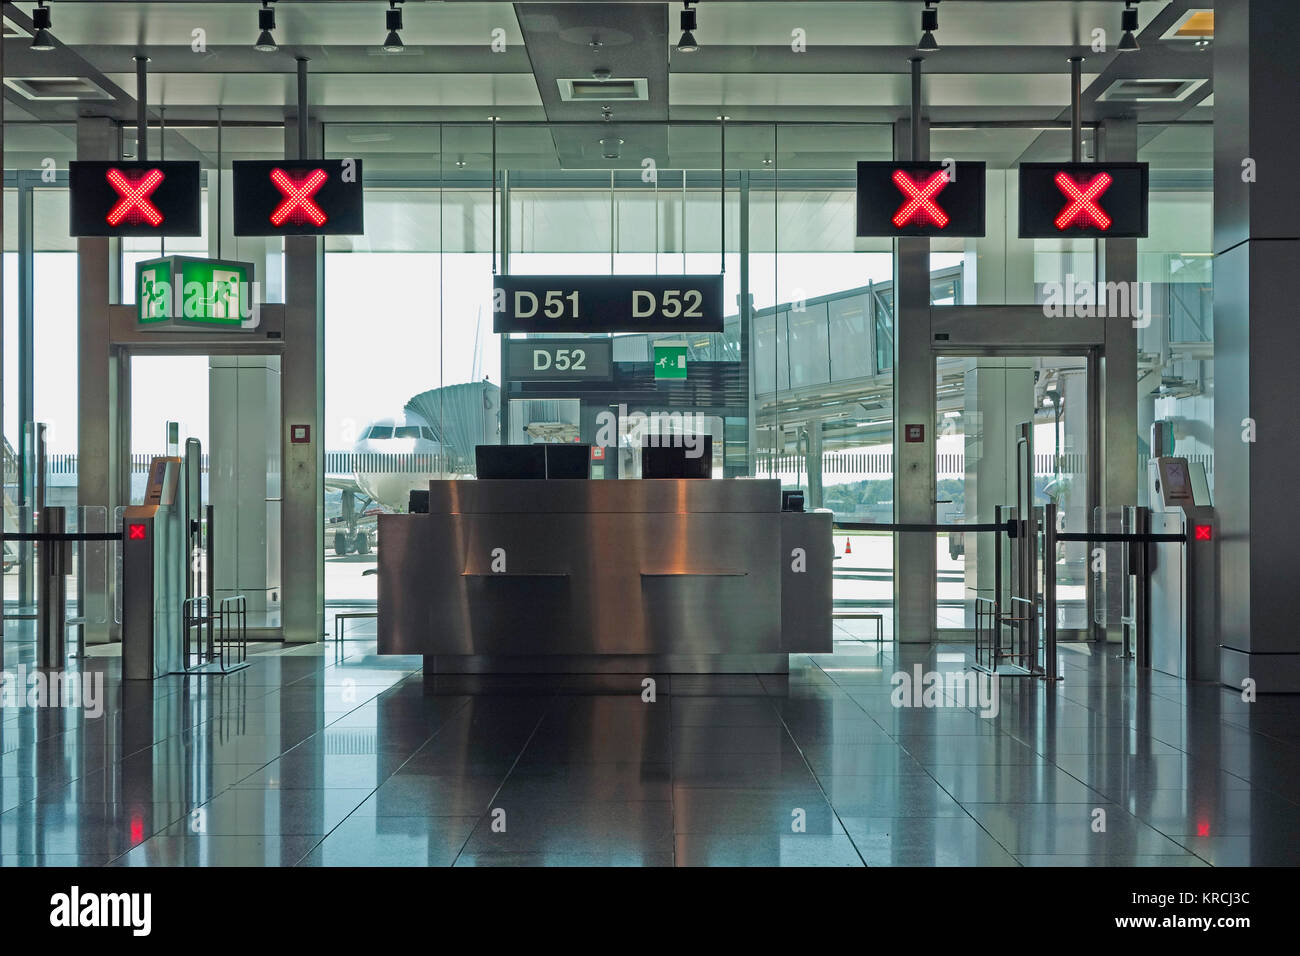 Modern airport departure check in gates closed with red X signs above and an aircraft on the runway. Stock Photo